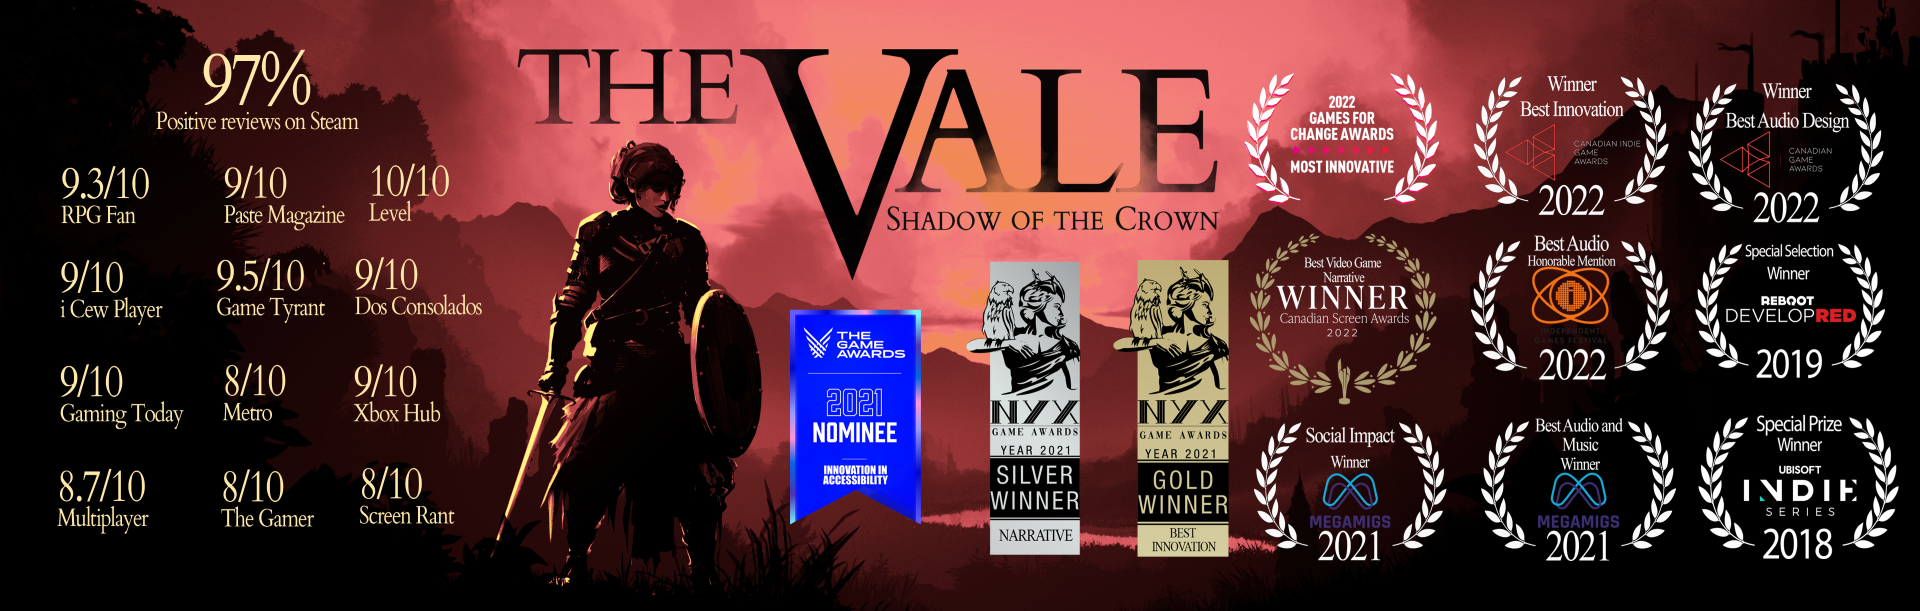 The Vale: Shadow of the Crown by Falling Squirrel, Falling Squirrel Dev